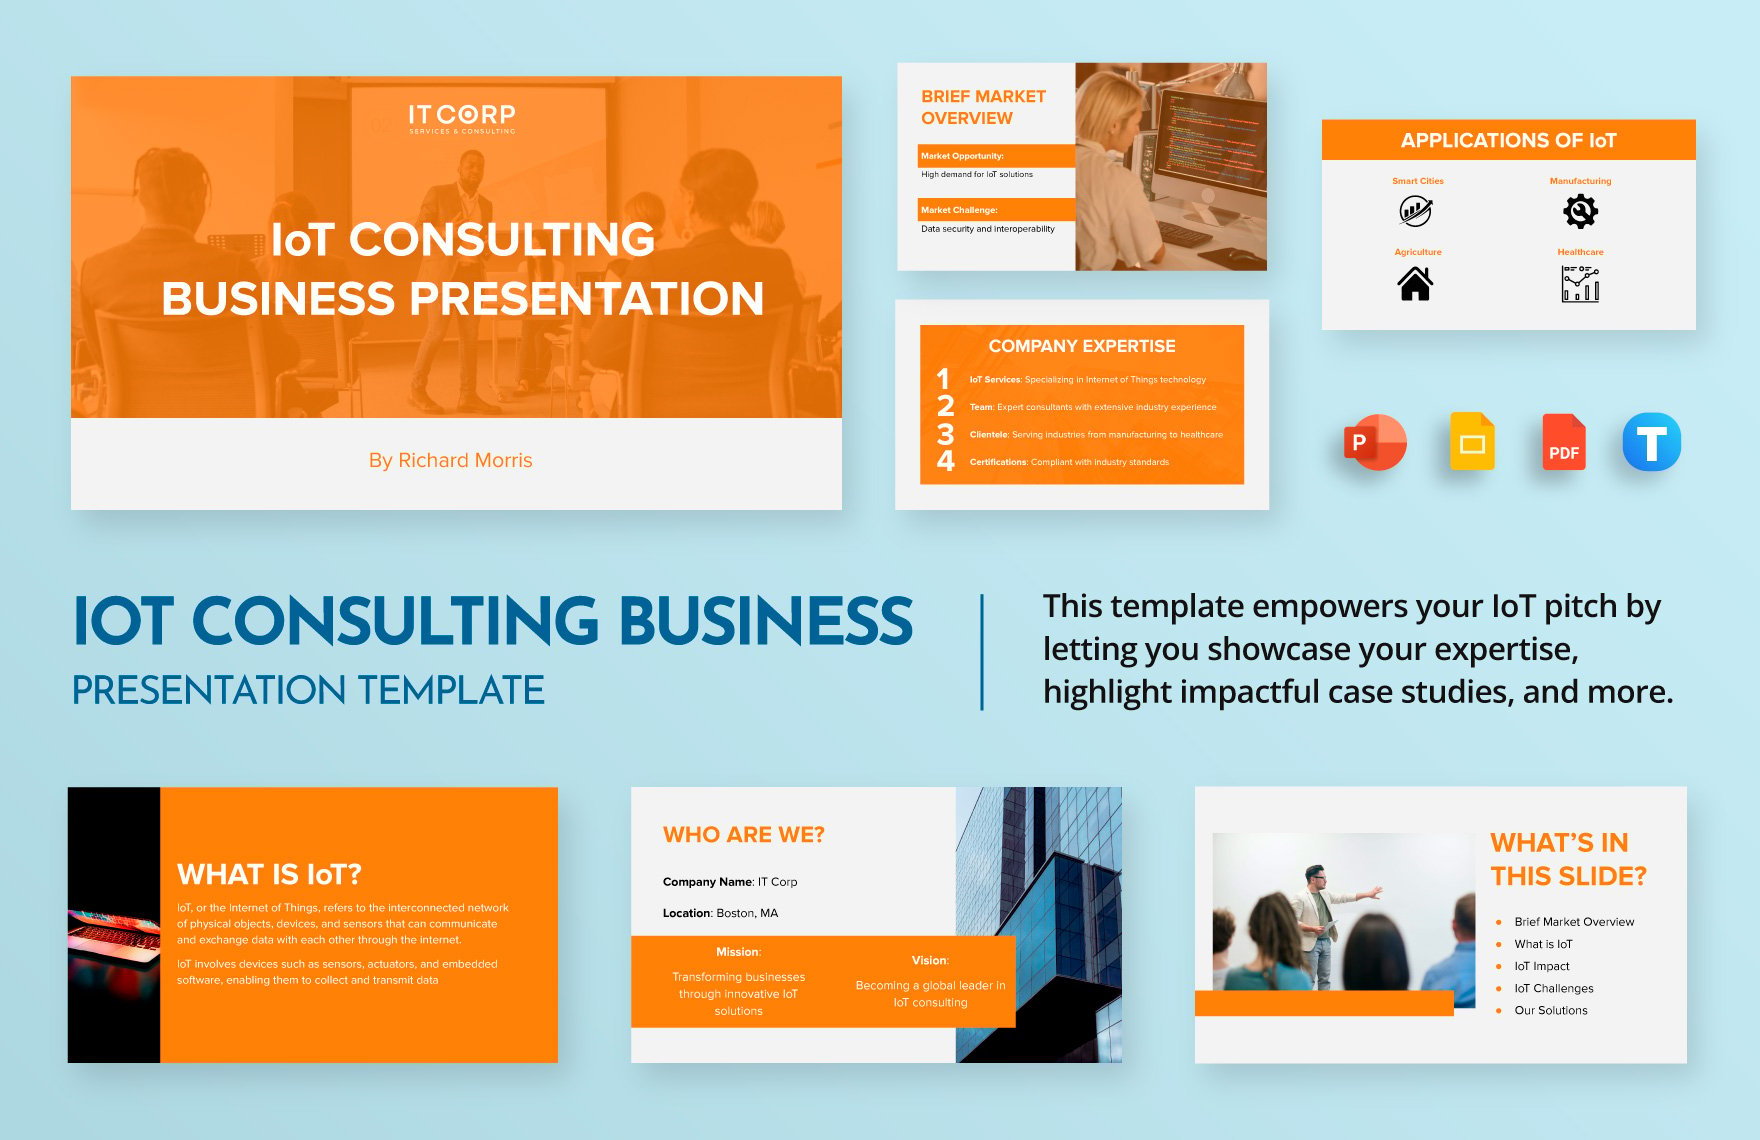 IoT Consulting Business Presentation Template